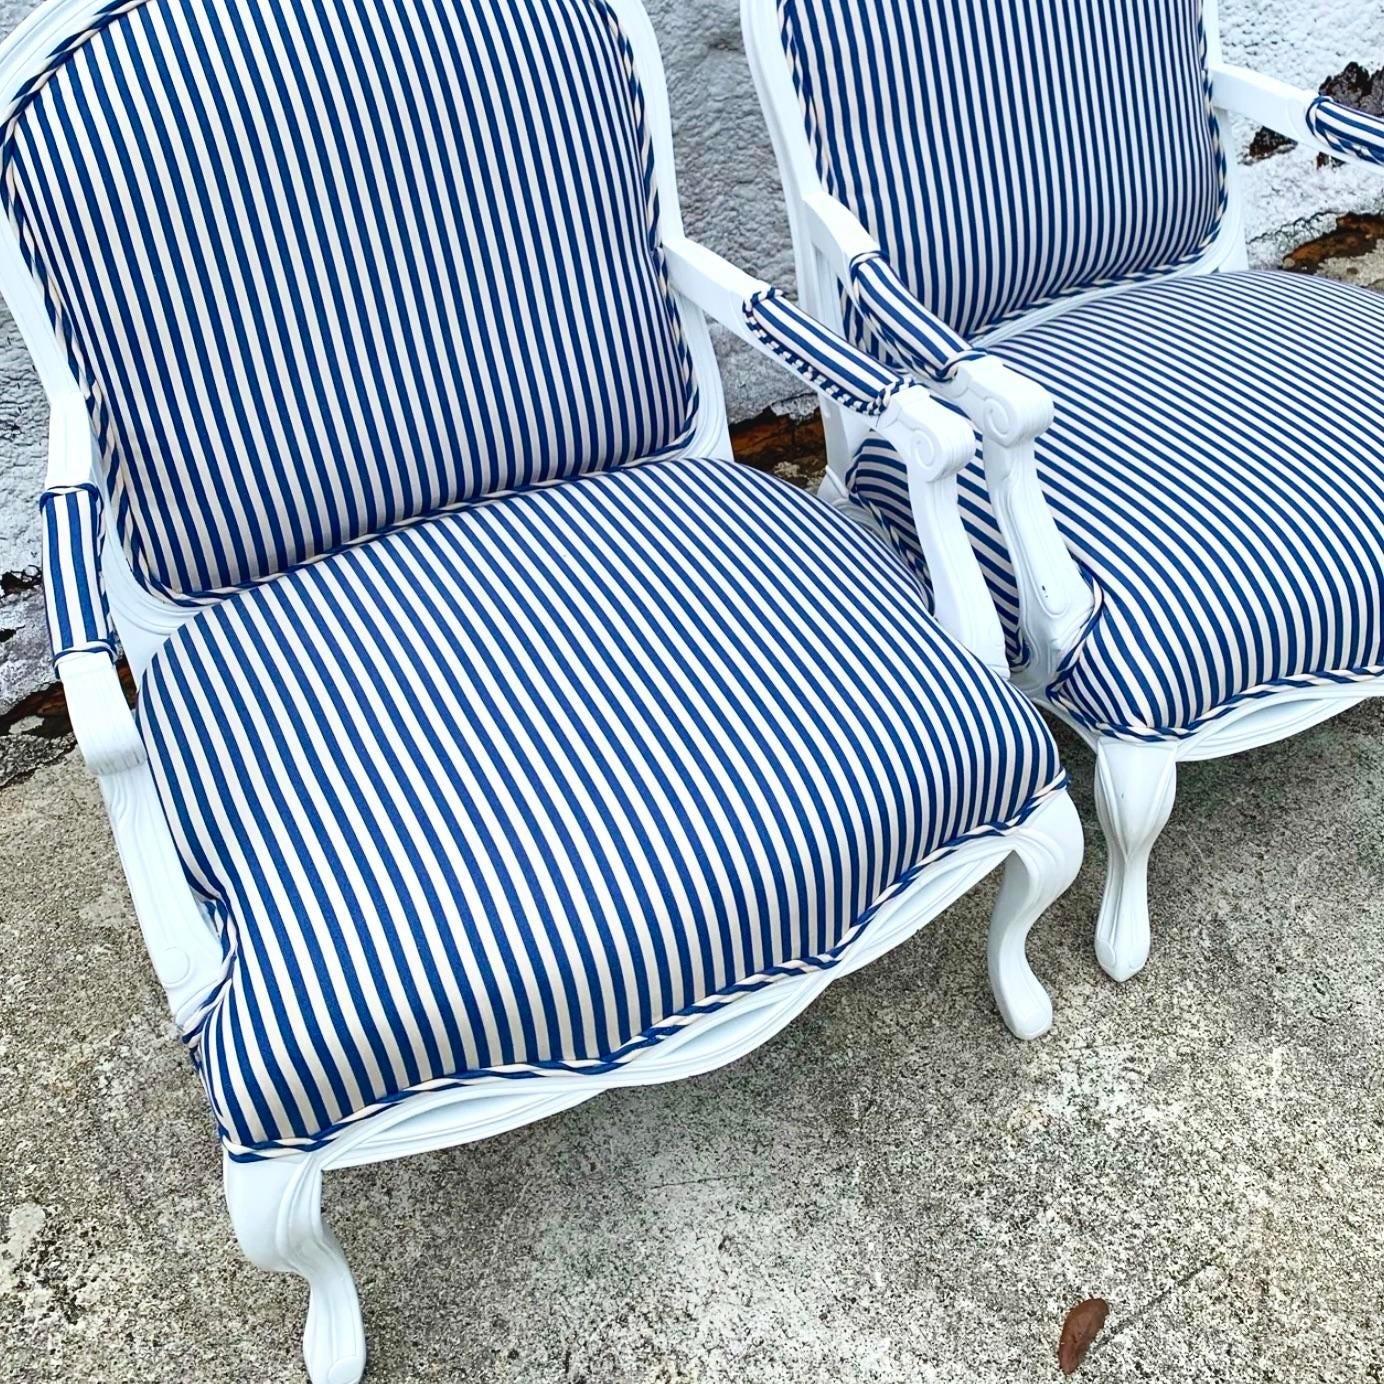 A sensational pair of vintage Regency Bergere chairs. Beautiful white lacquered frame with a new blue and white satin stripe upholstery. Two pairs available on my page. Acquired from a Wellington estate.